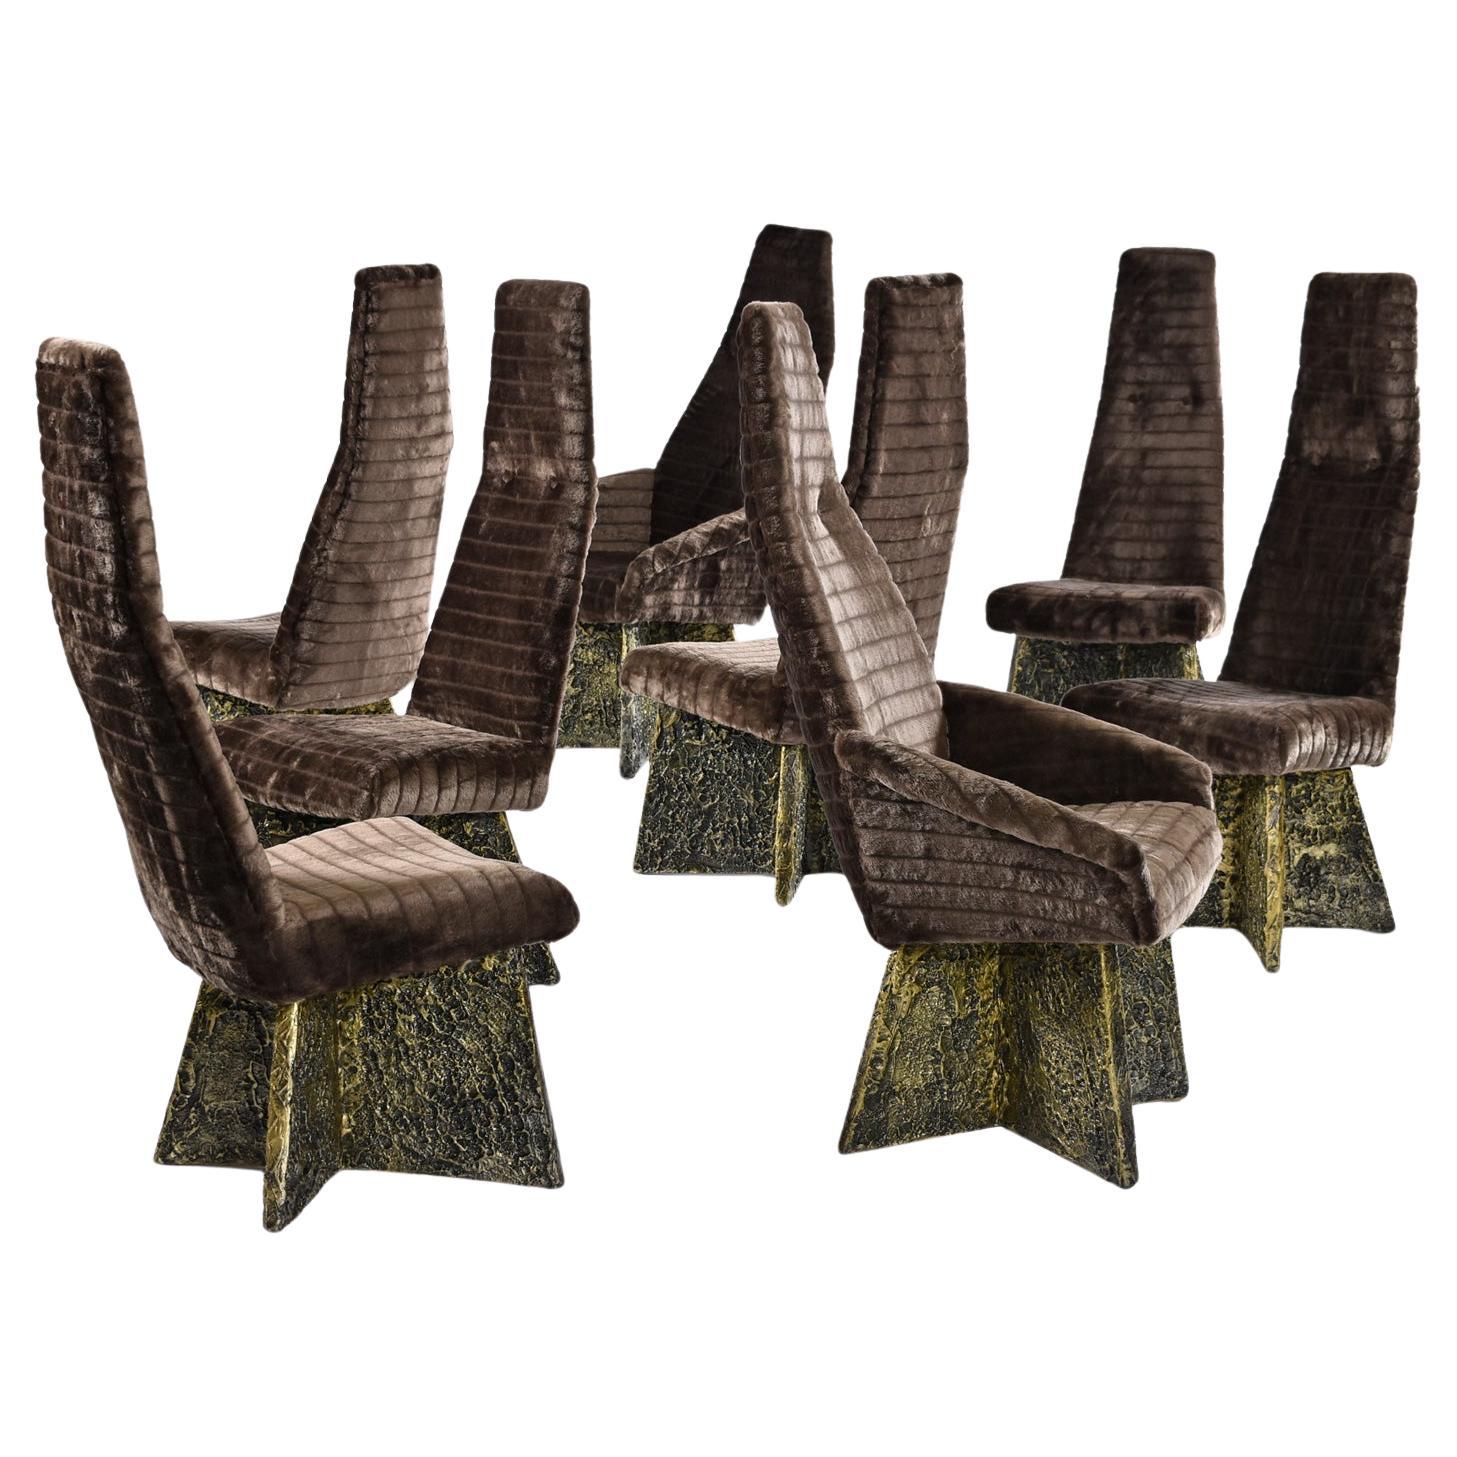 (8) Adrian Pearsall Kodiak Faux Fur Brutalist Style Dining Room Chairs For Sale